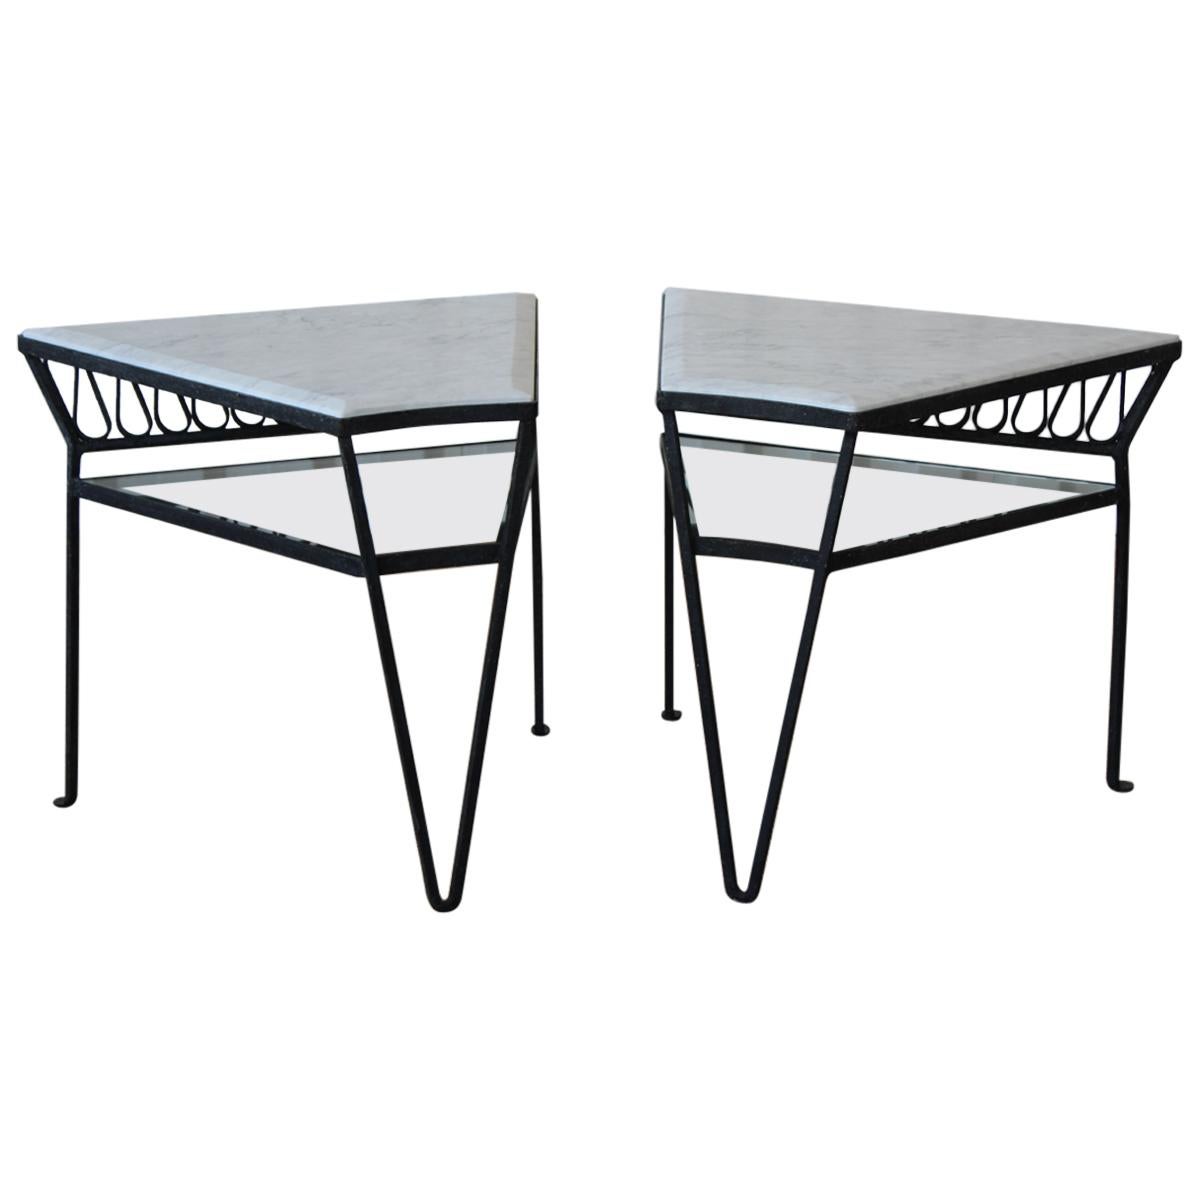 Pair of Iron Side Tables by Maurizio Tempestini for Salterini, Italy, 1950s